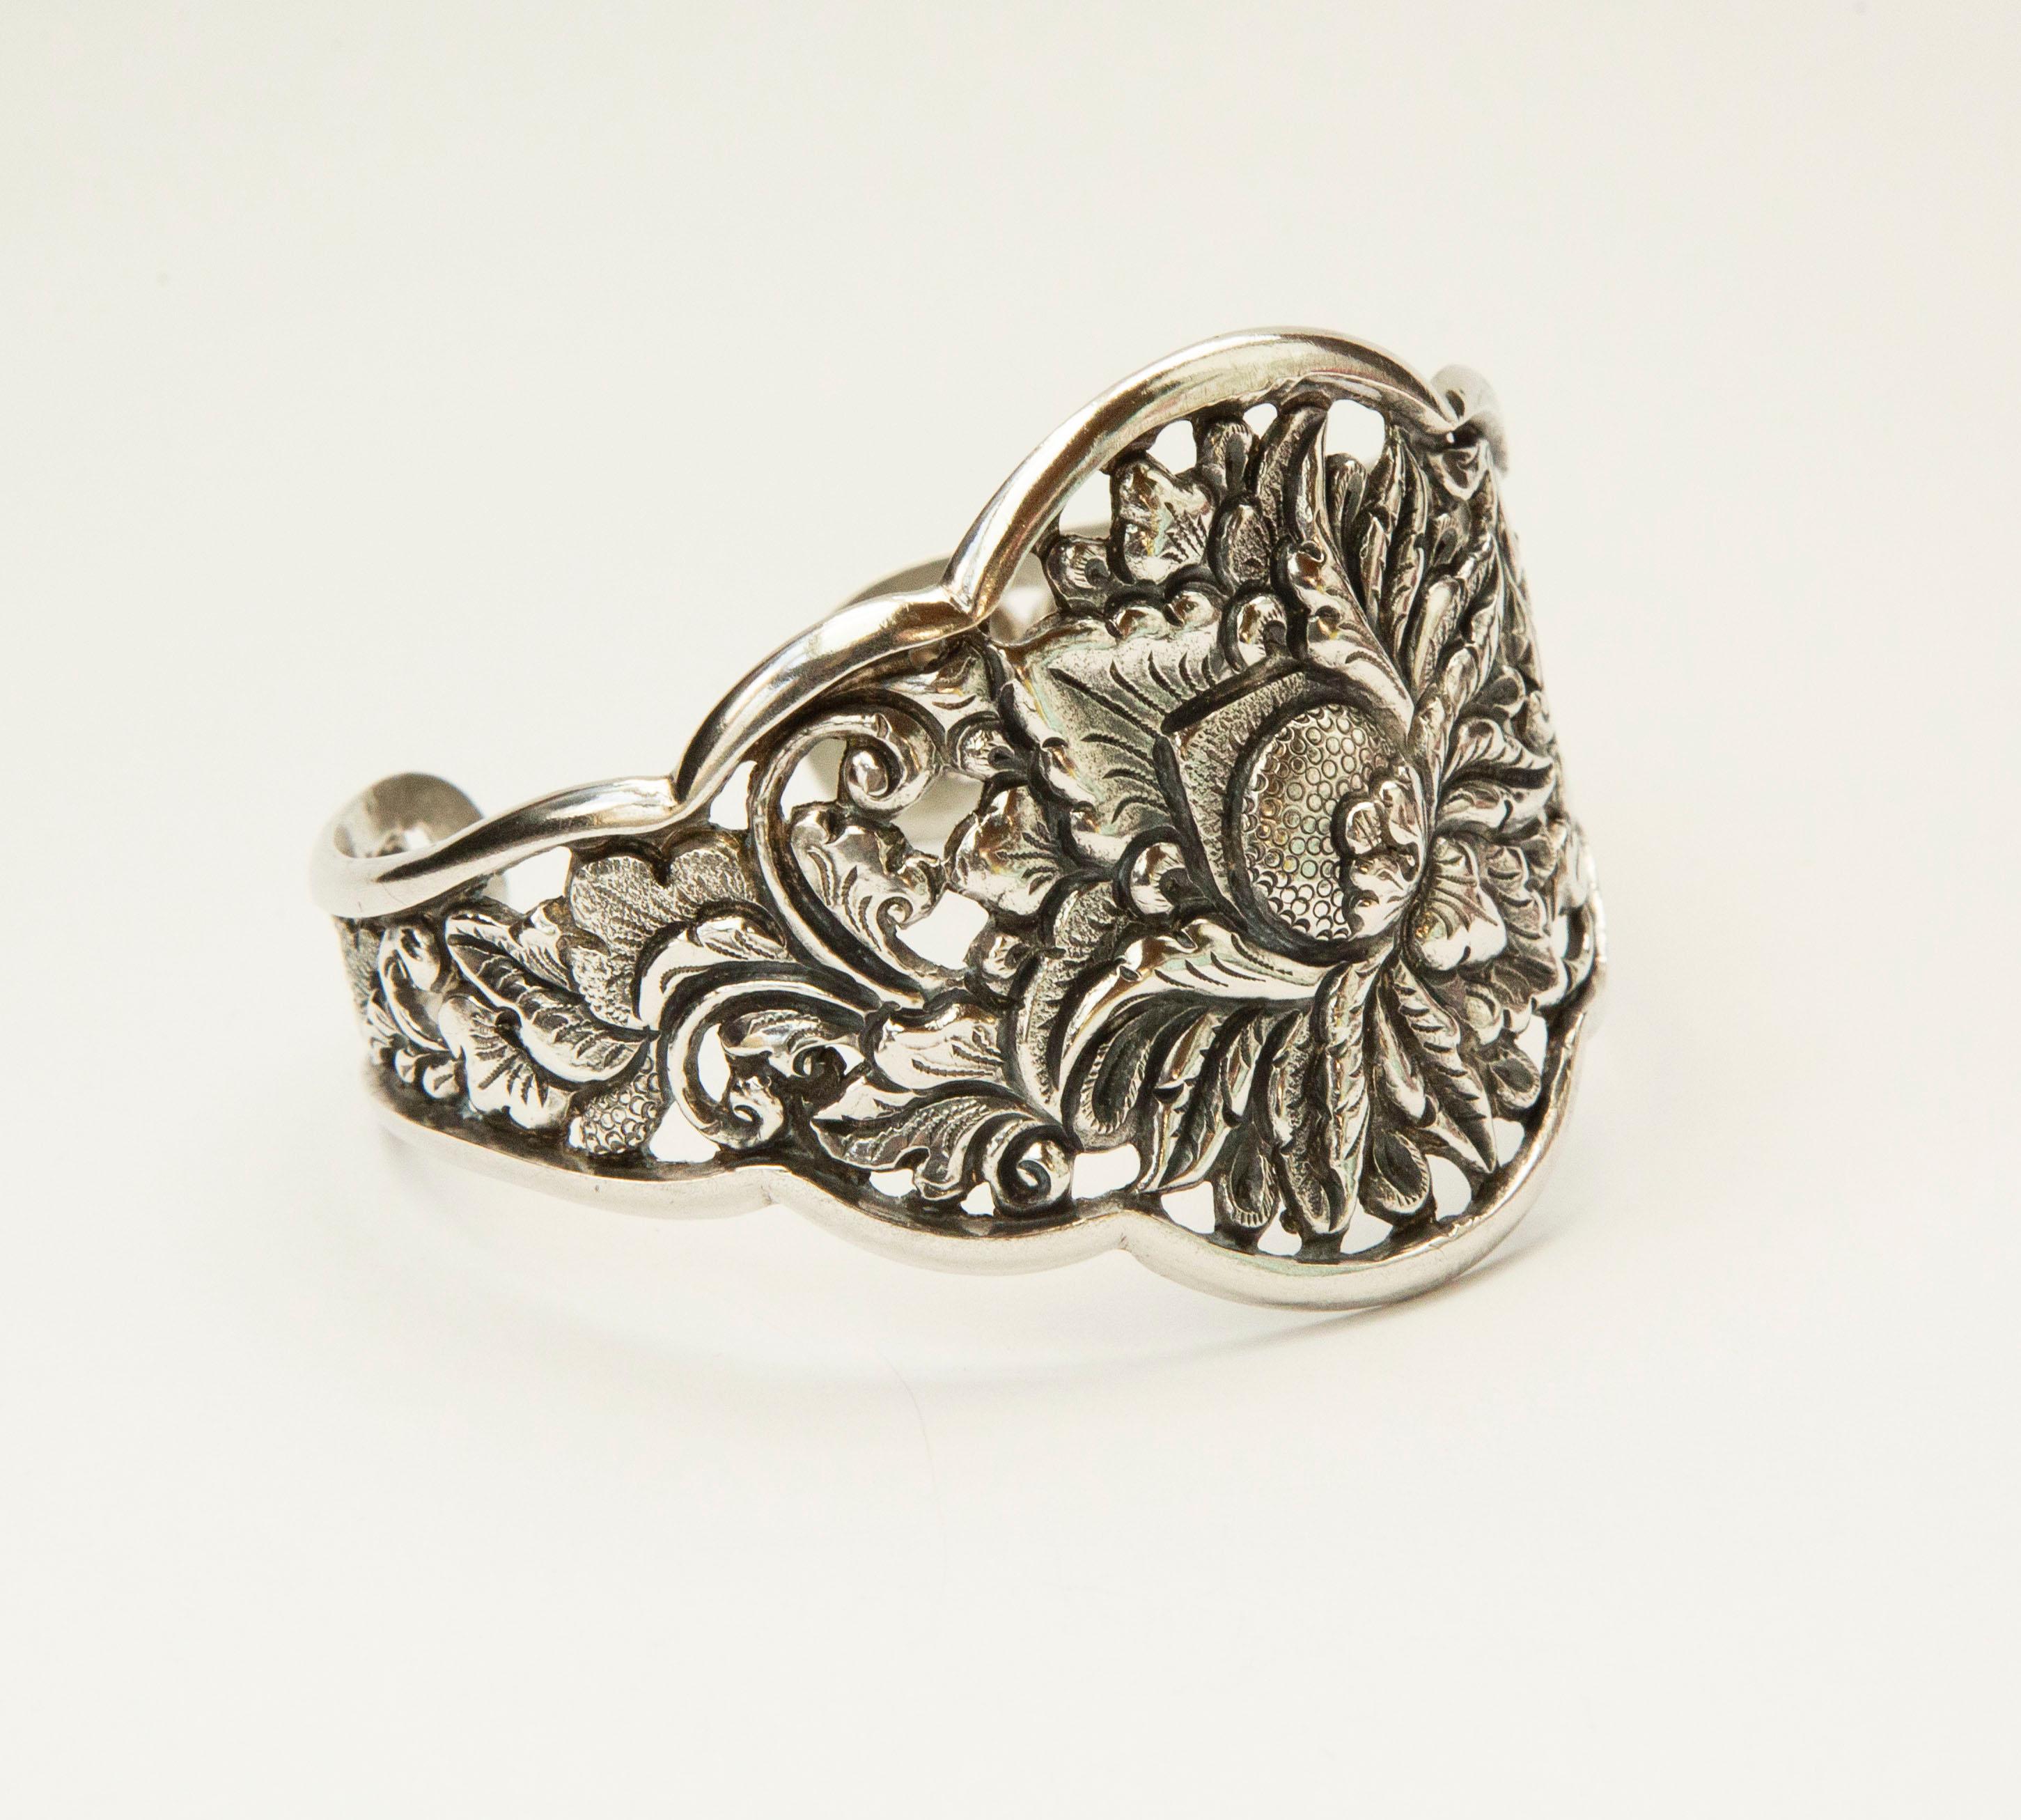 Women's or Men's Vintage Indonesian Silver 800 Cuff Bracelet with Floral Decor CA. 1930s For Sale